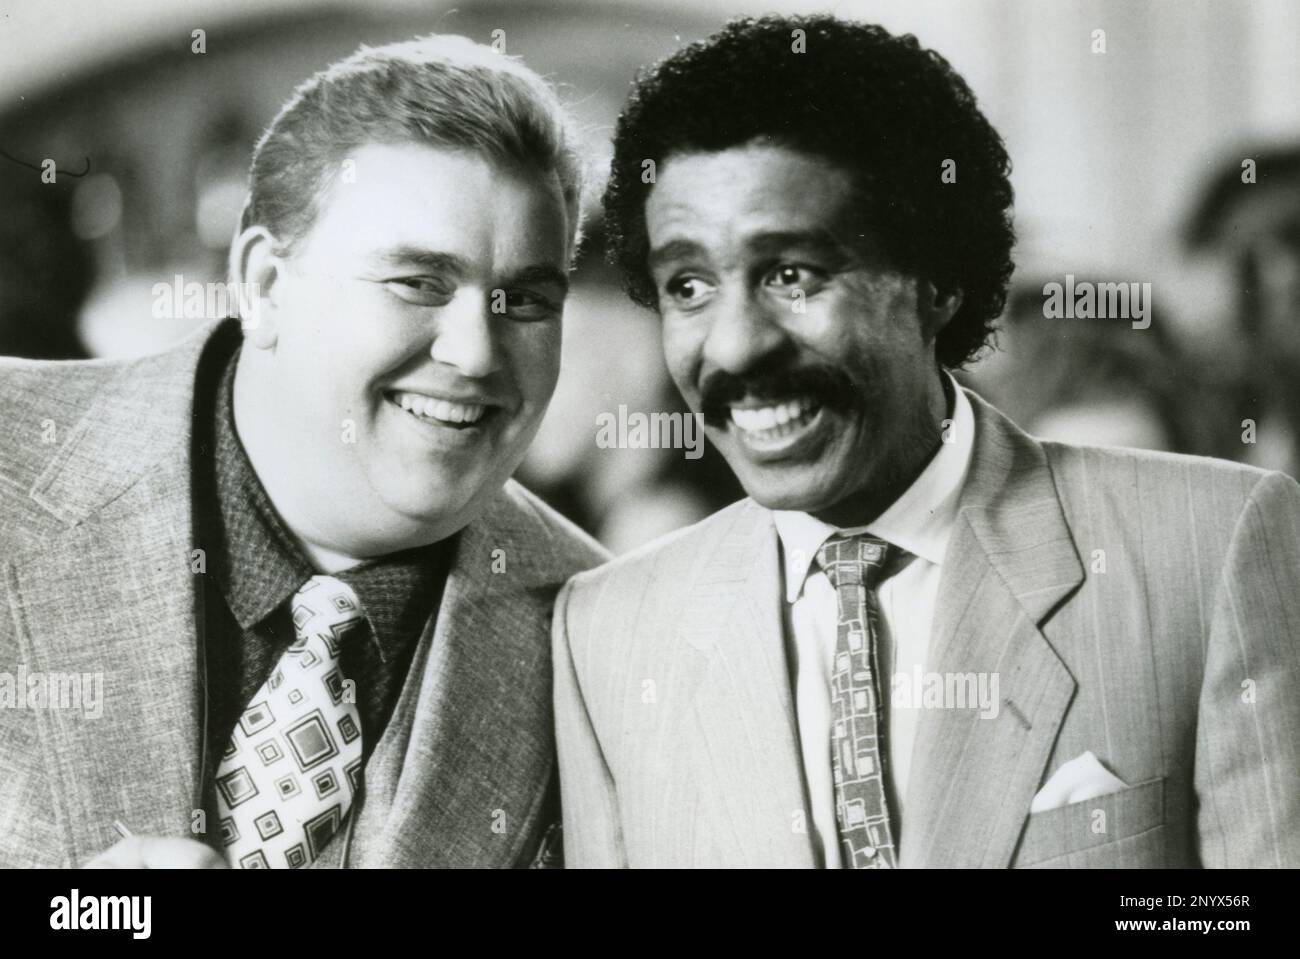 Actors John Candy and Richard Pryor in the movie Brewster's Millions, USA 1985 Stock Photo